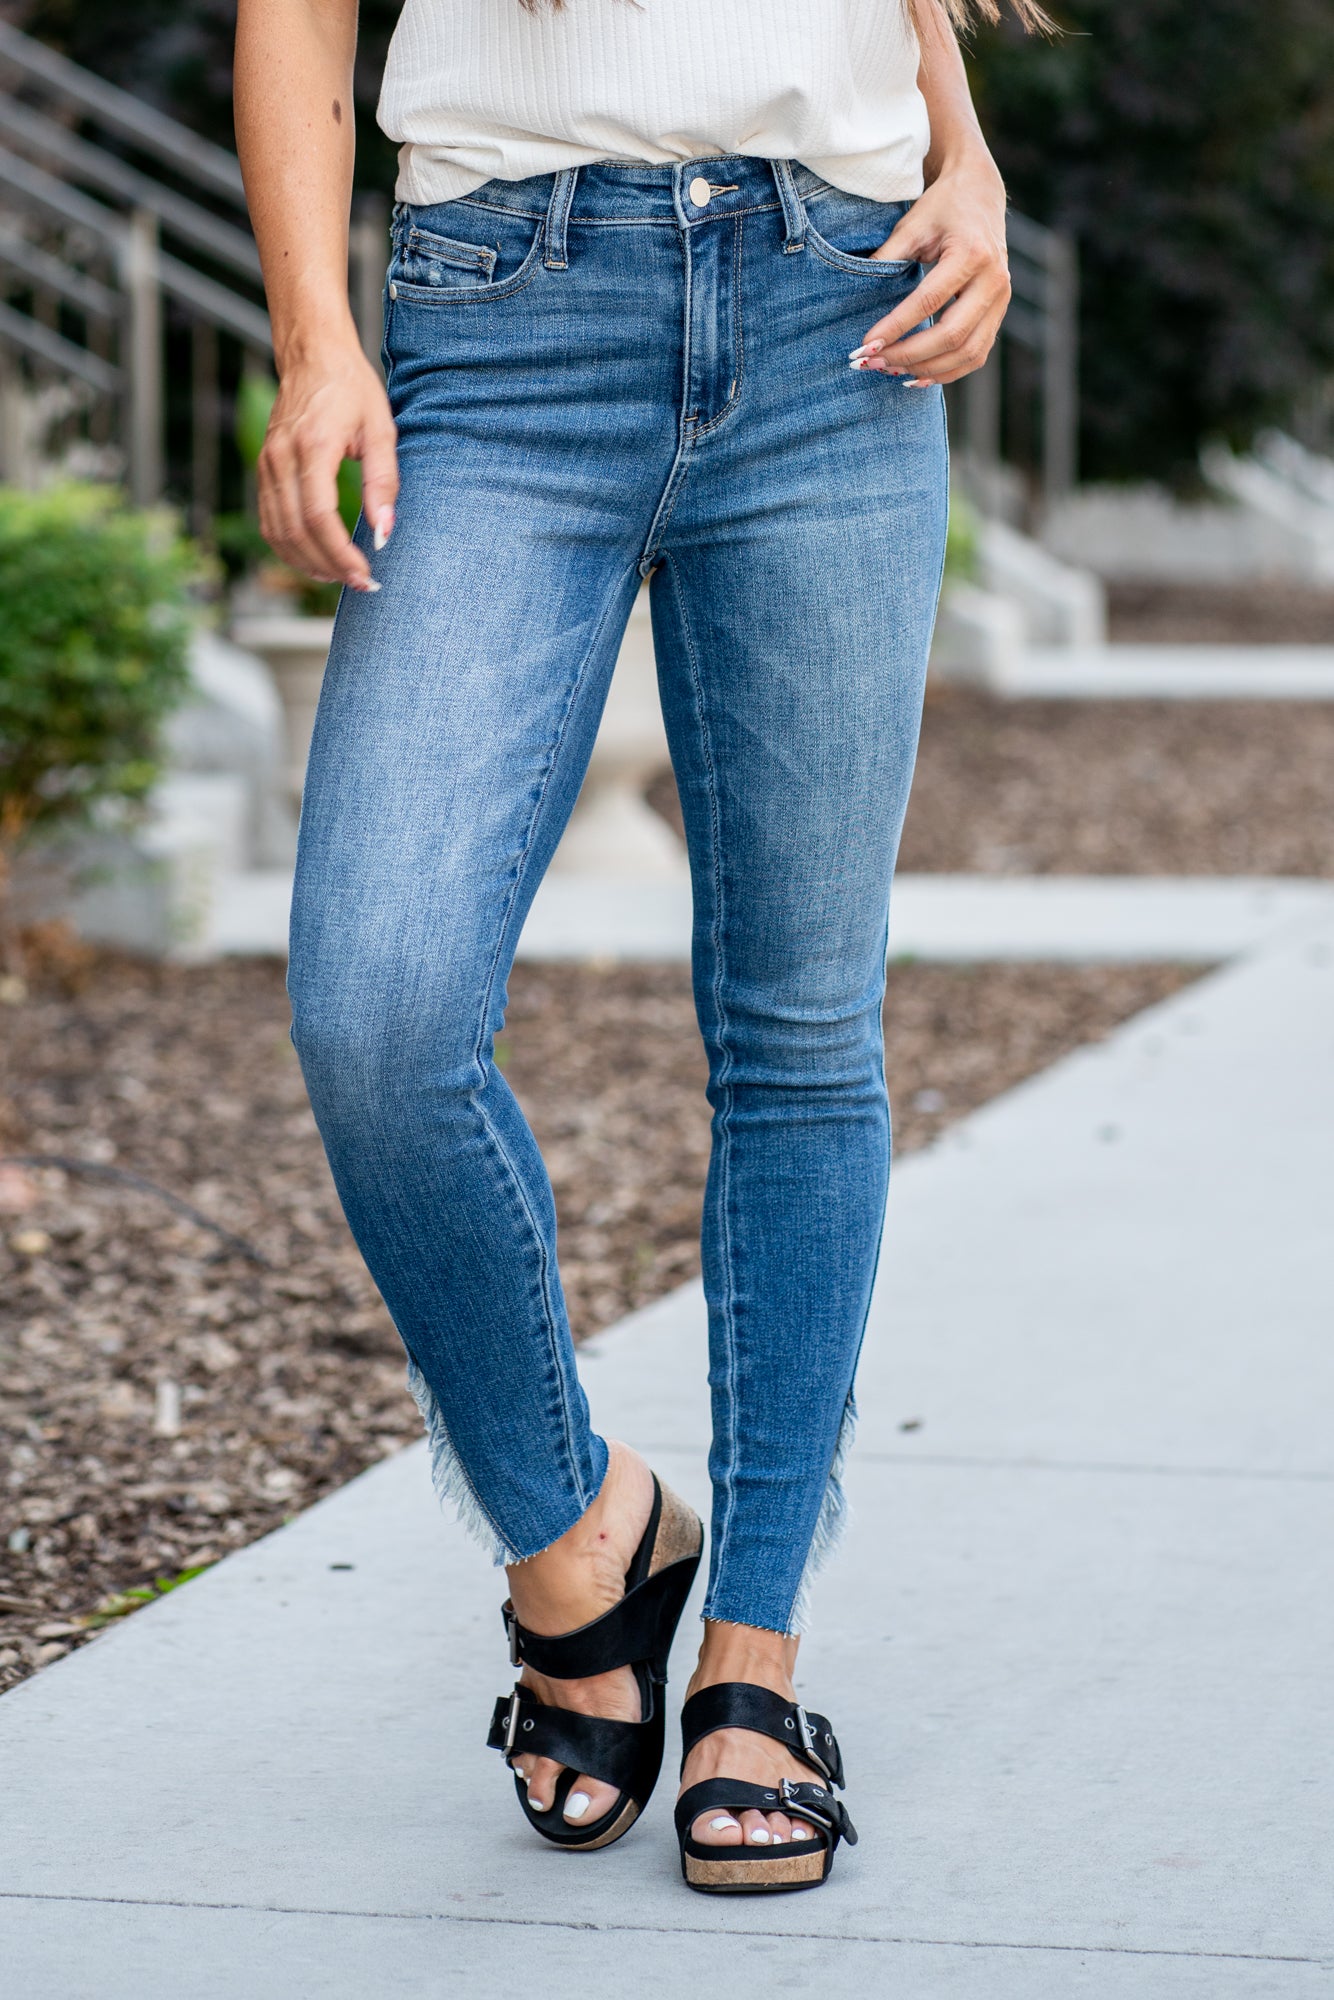 Judy Blue Denim - That's Why They Call It The Blues Jeans – The